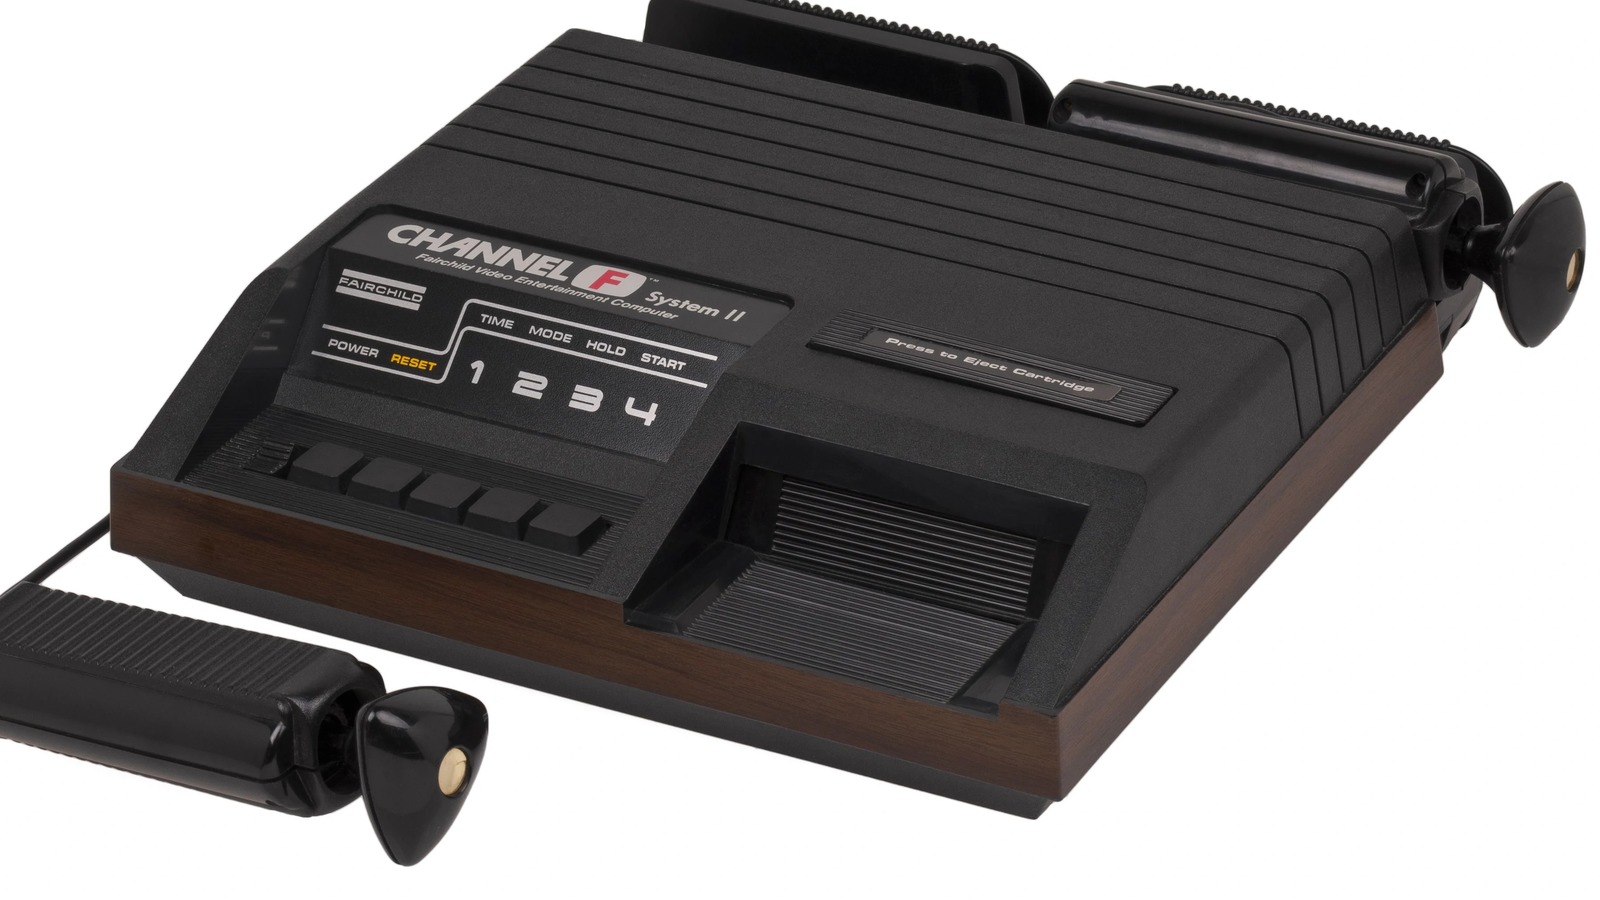 Fairchild Channel F: The Truth About The First Cartridge-Based Console